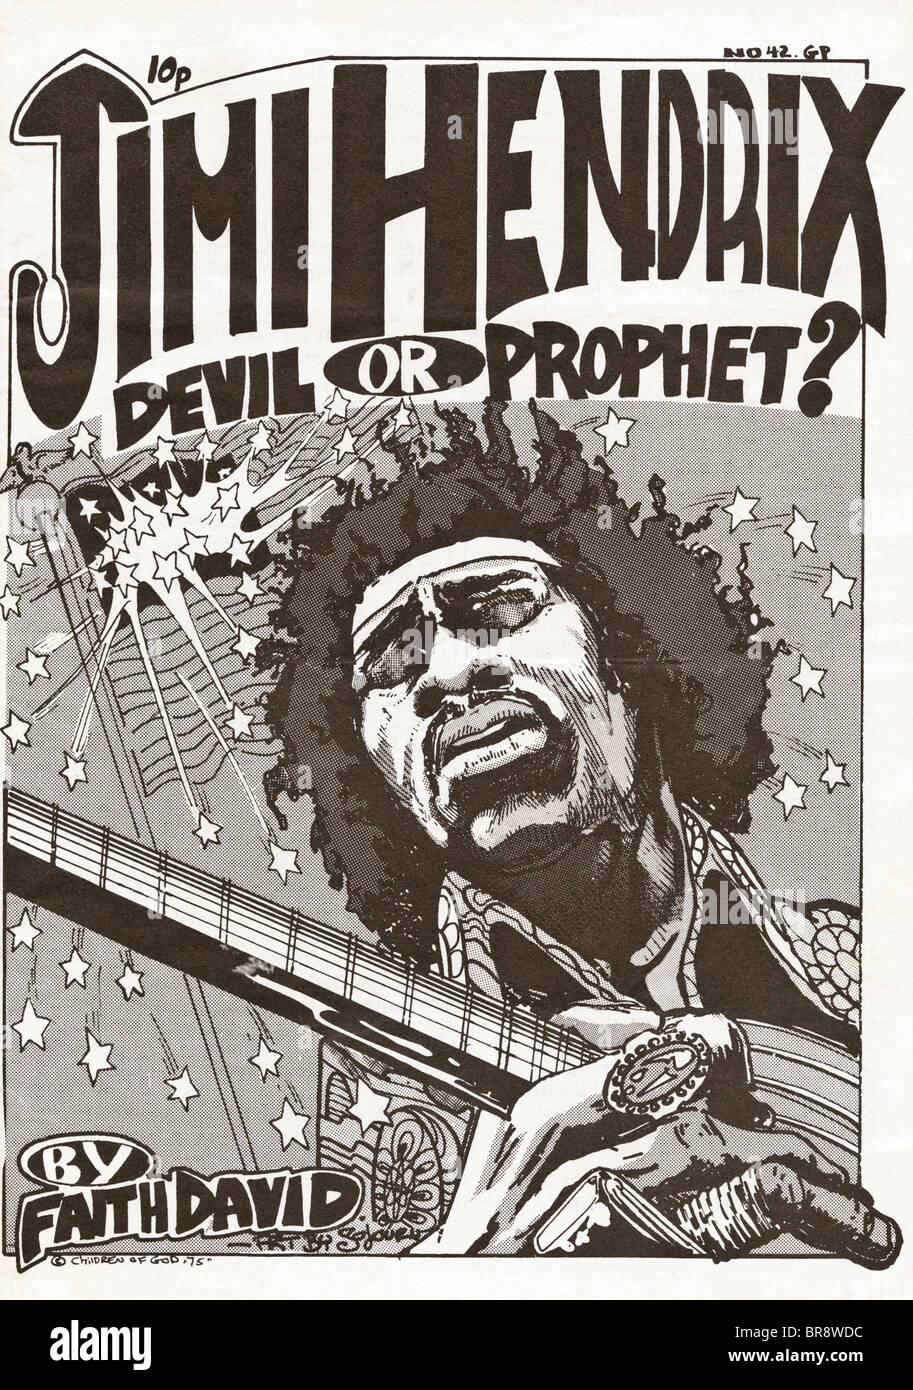 Jimi Hendrix Devil of Prophet? by Faith David cover of pamphlet by the Children of God a religious cult circa 1975 Stock Photo